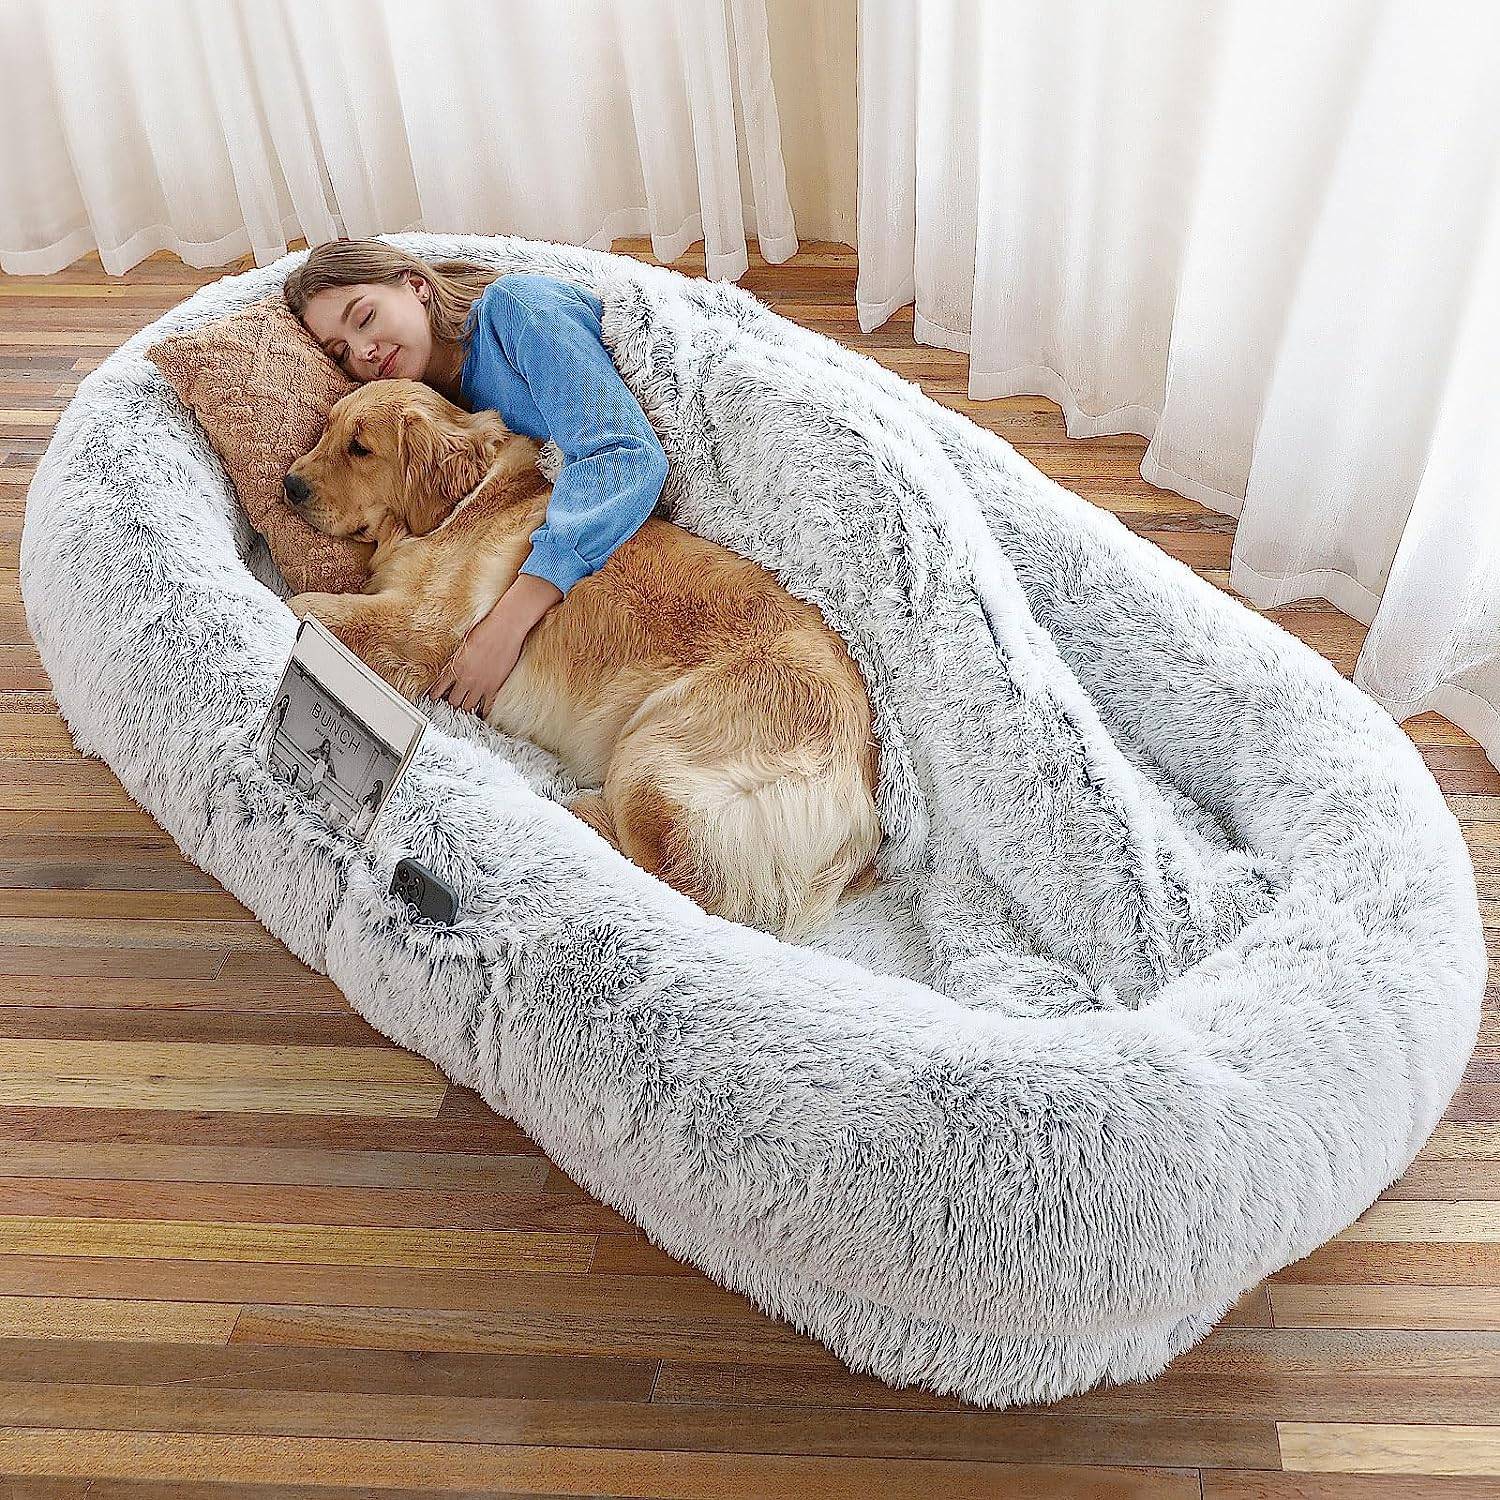 human dog bed woman and golden retriever sleeping in